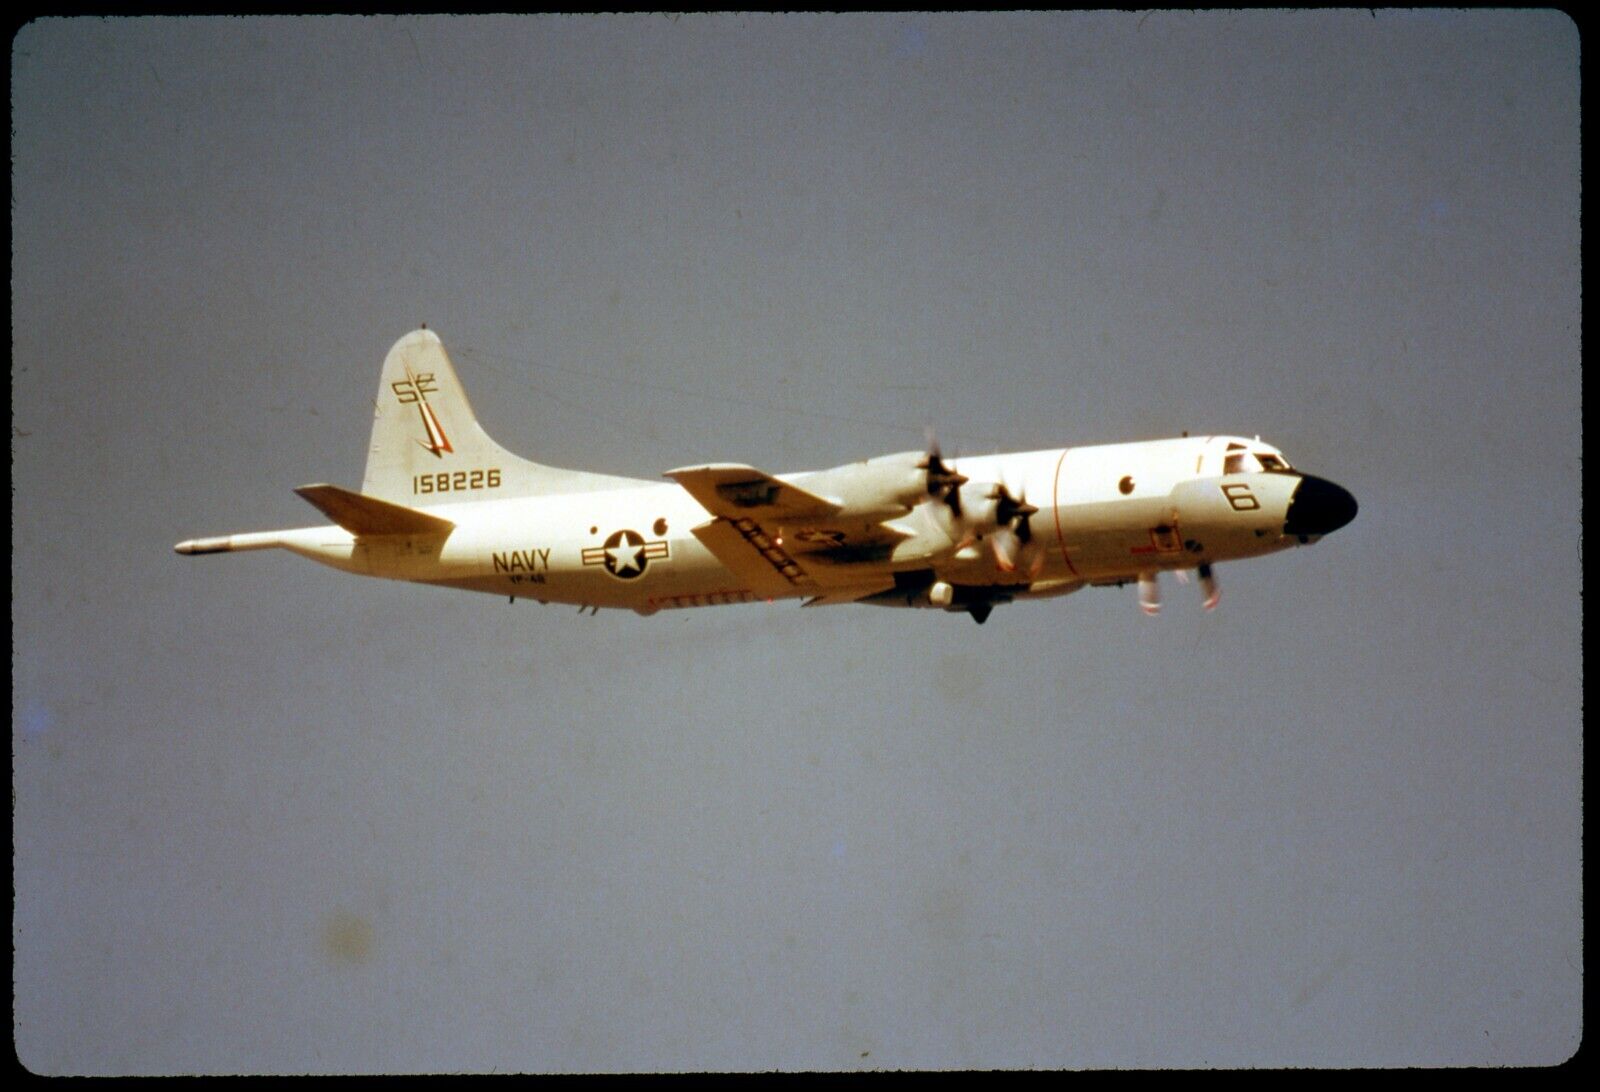 Vintage 35mm duplicate slide of a VP-48 P-3C Orion 158226 photographed in 1975